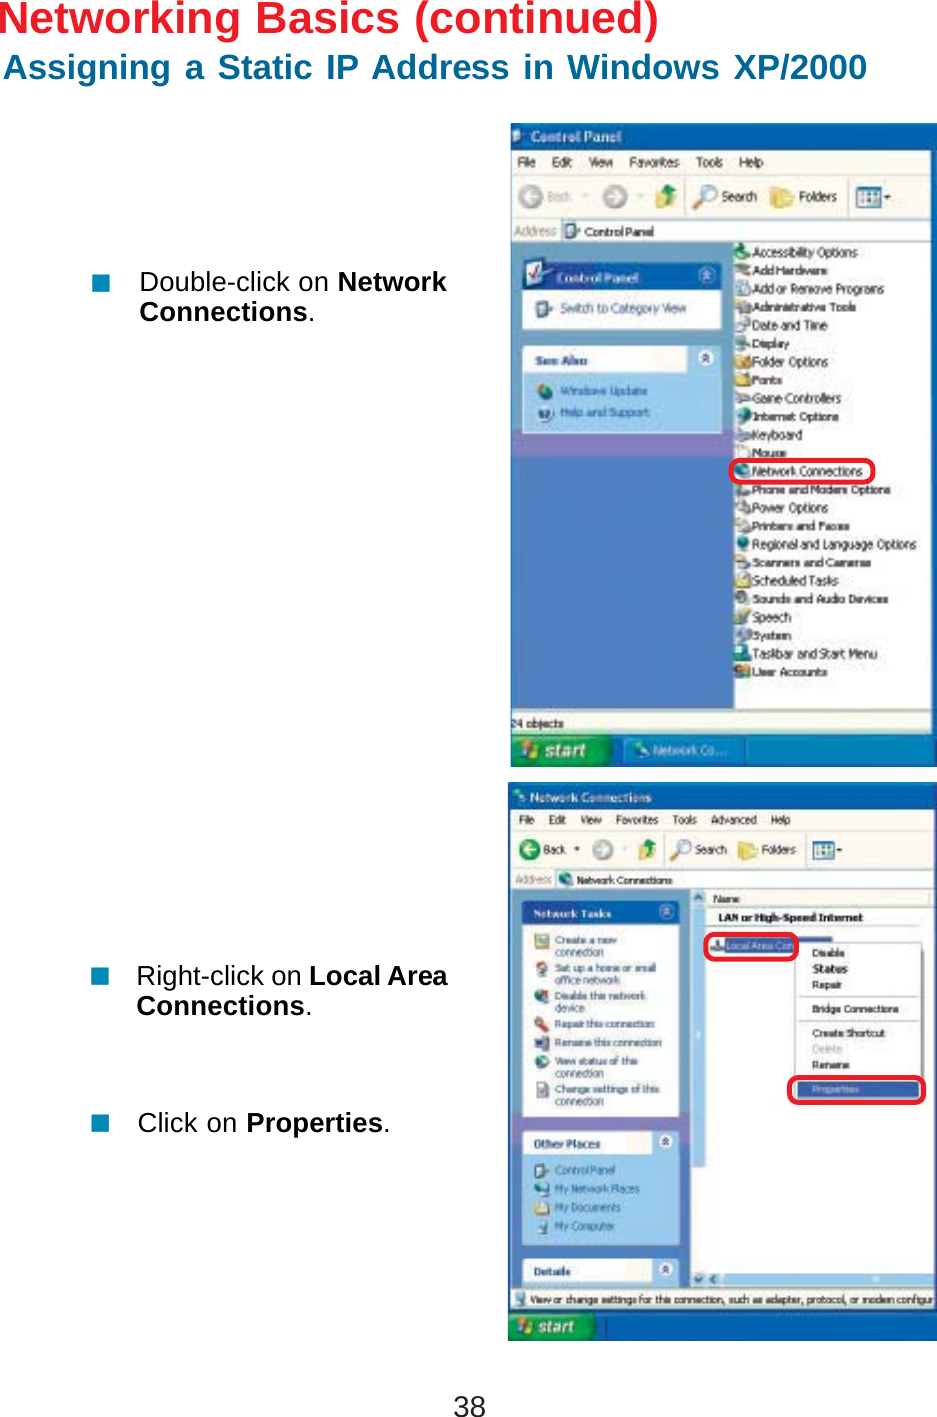 38Double-click on NetworkConnections.Click on Properties.Right-click on Local AreaConnections.Networking Basics (continued)Assigning a Static IP Address in Windows XP/2000